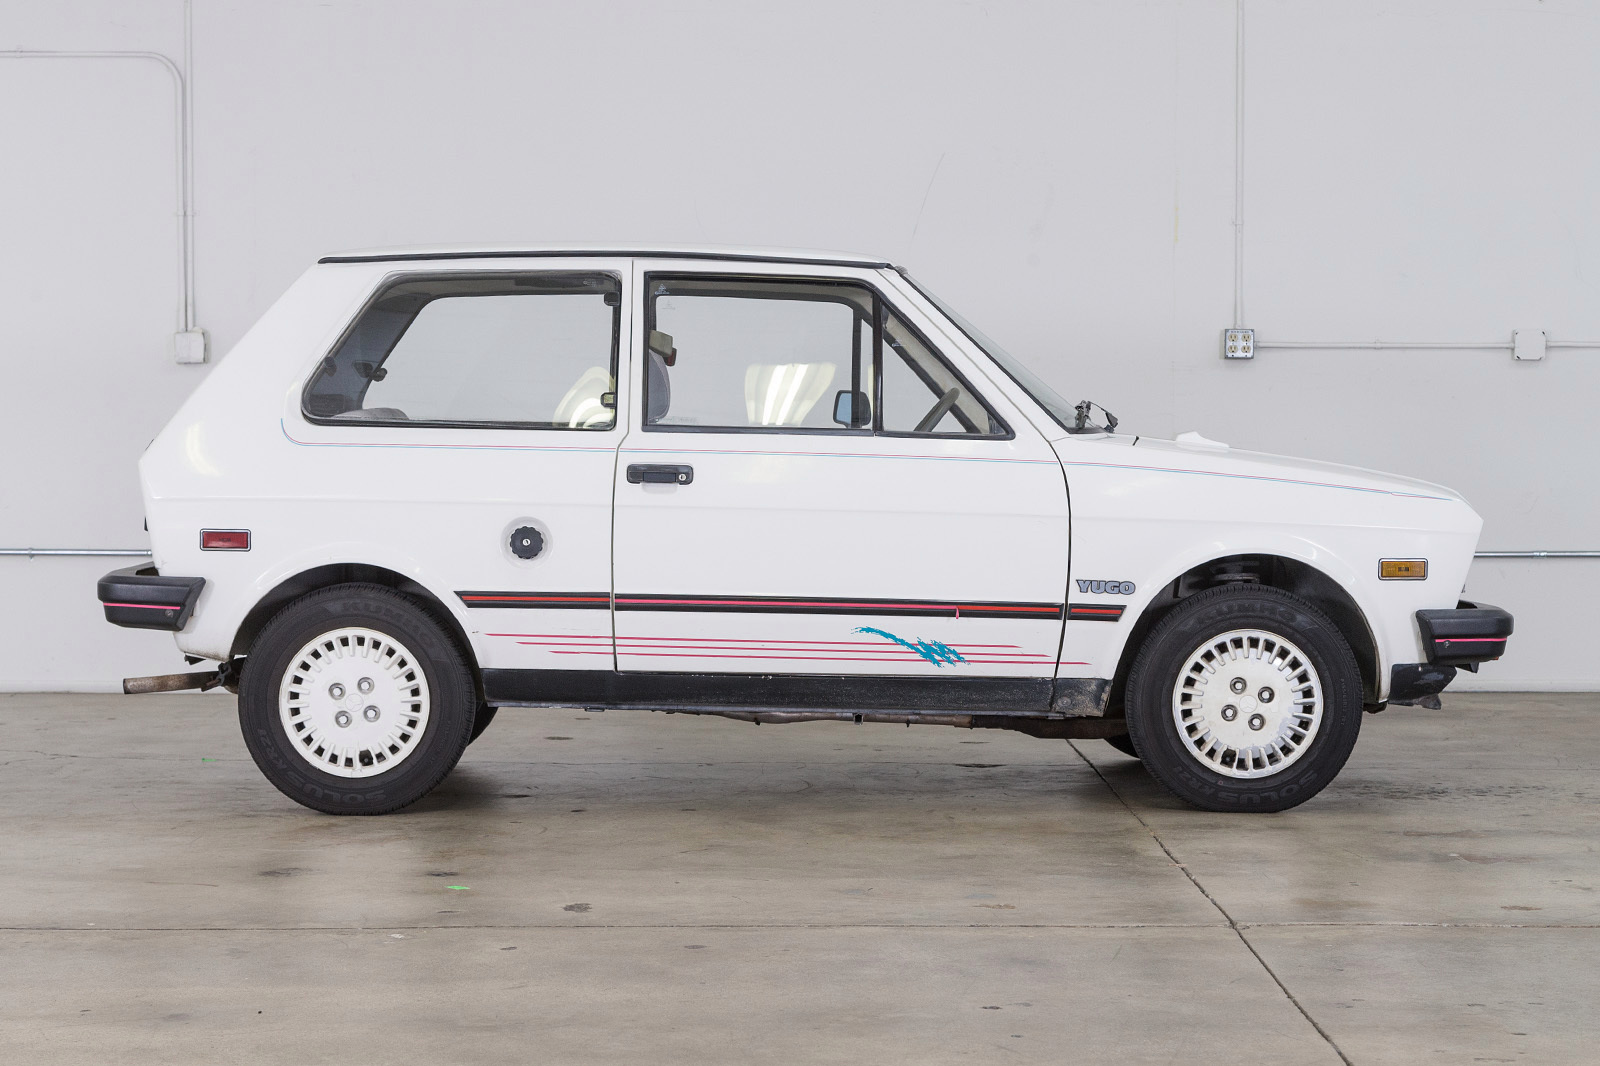 A small, white, hatchback profile-view of the Yugo.